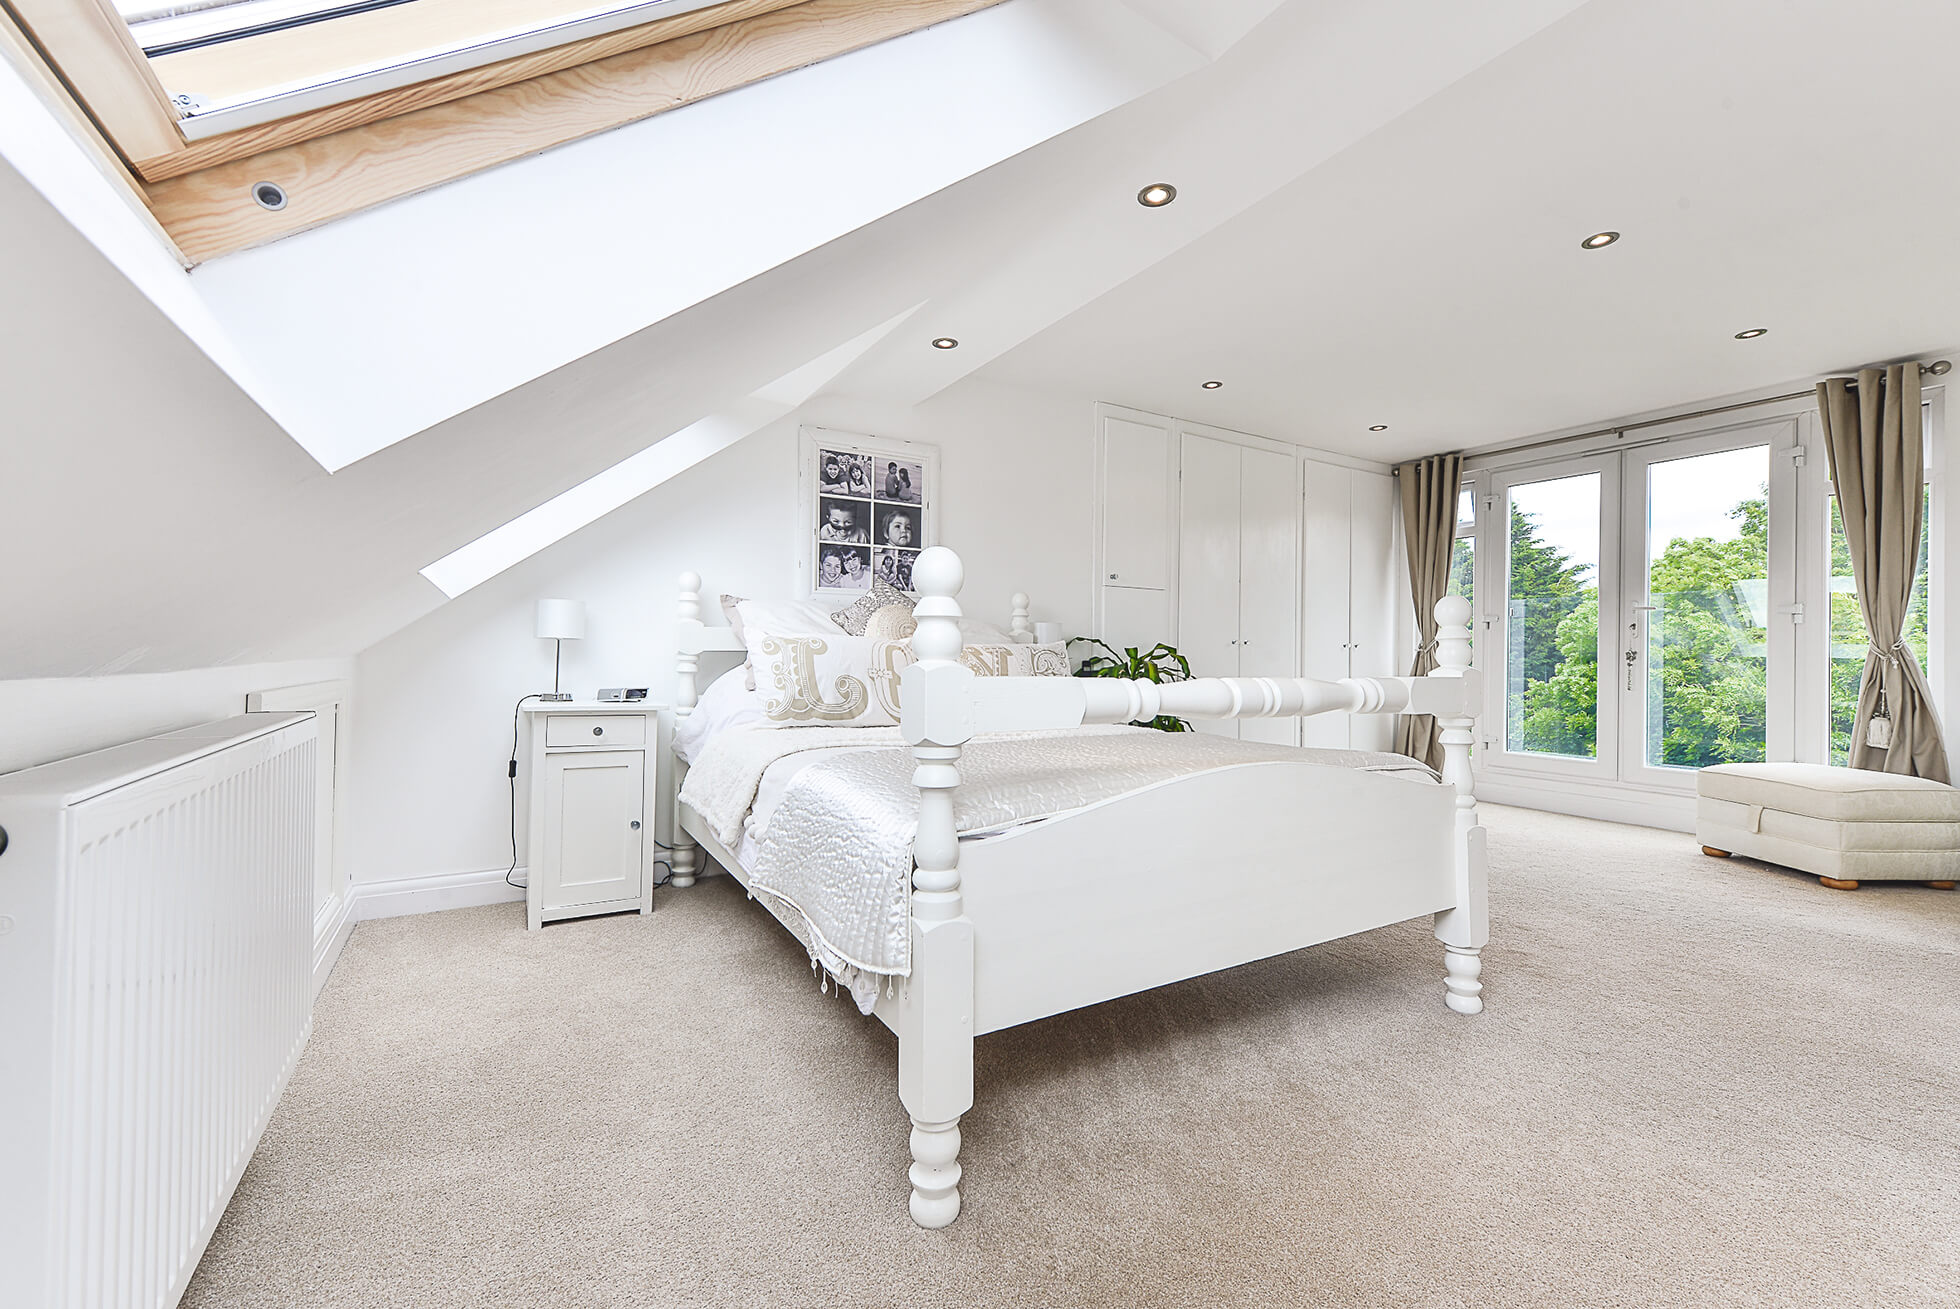 Do you have a question about converting your Loft in Goffs Oak? Here are the most popular questions asked by our clients.